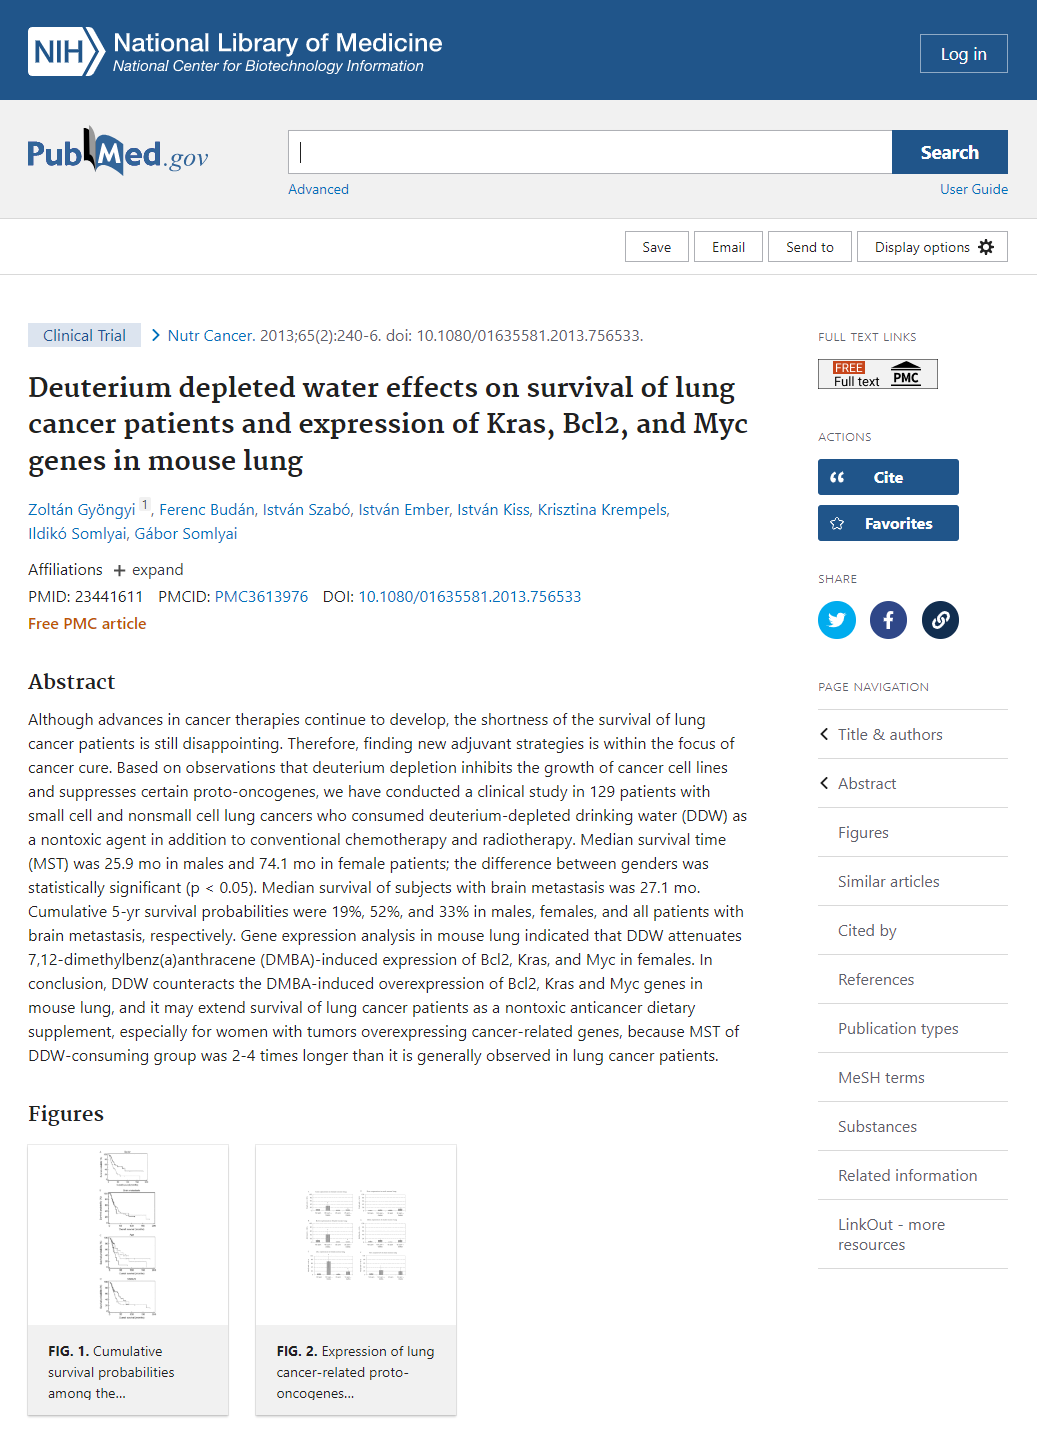 Deuterium depleted water effects on survival of lung cancer patients and expression of Kras, Bcl2, and Myc genes in mouse lung